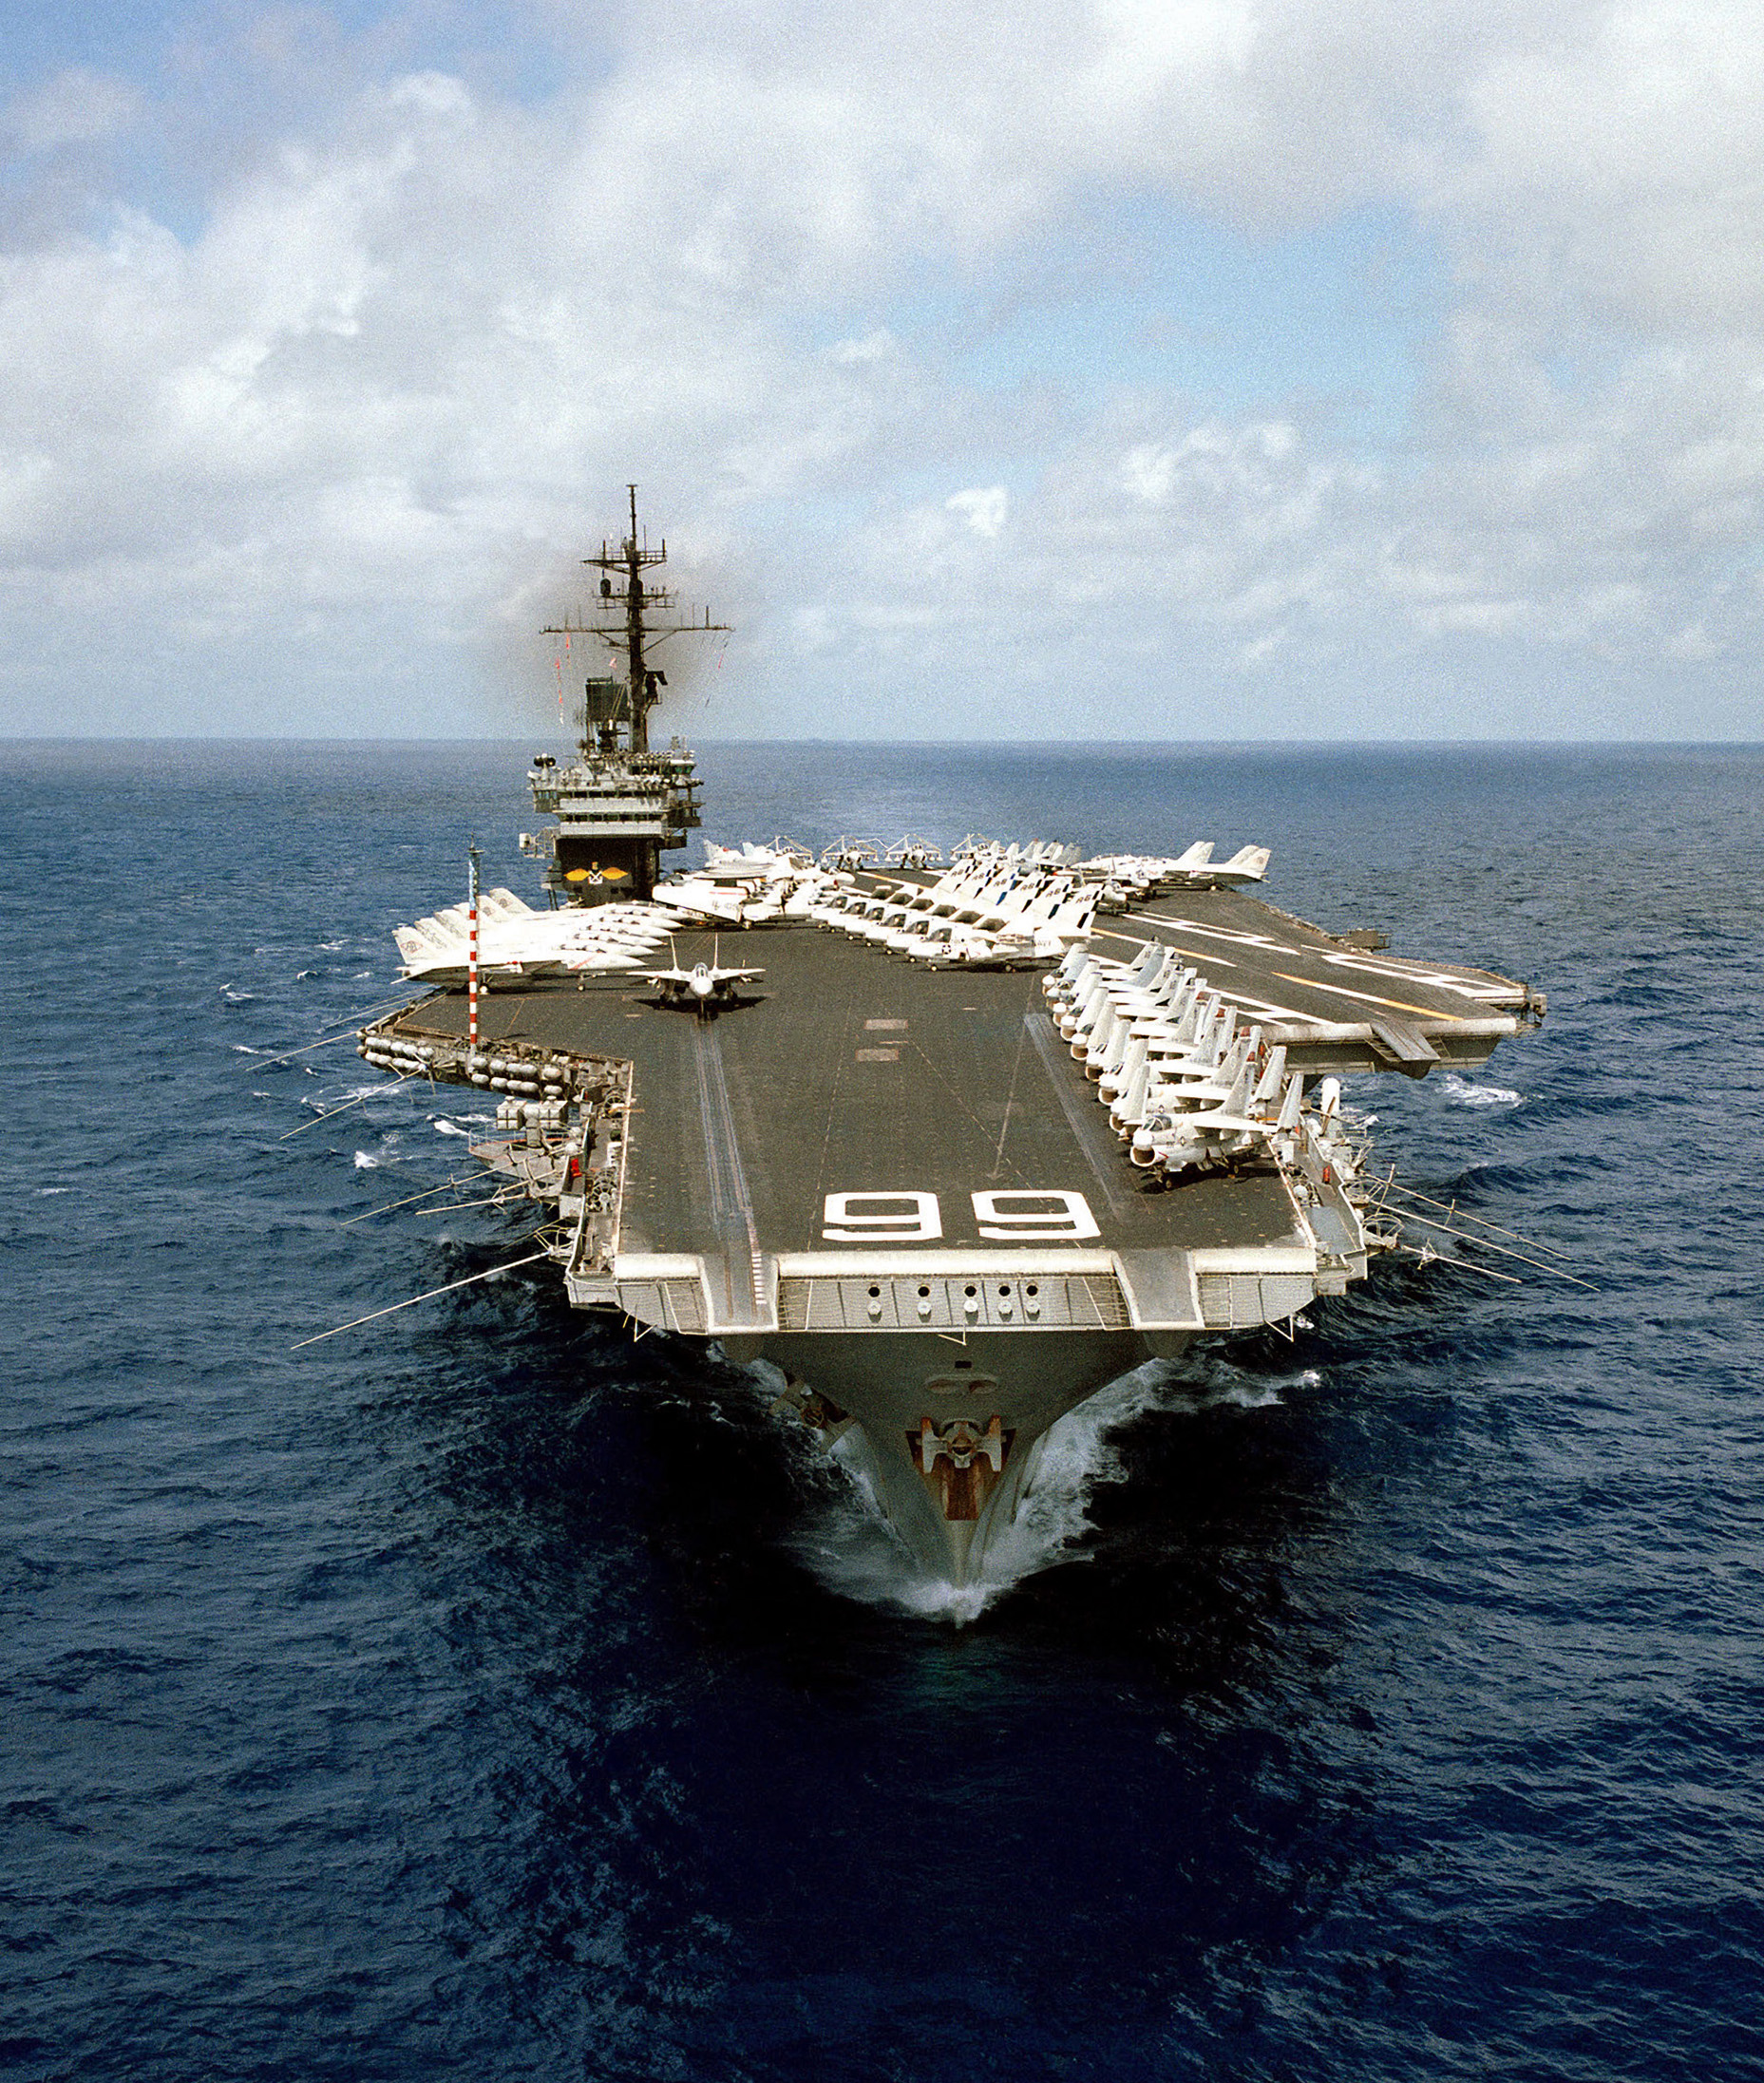 US Navy 050420-N-0000X-002 An aerial bow view of the conventionally-powered aircraft carrier USS America (CV 66)